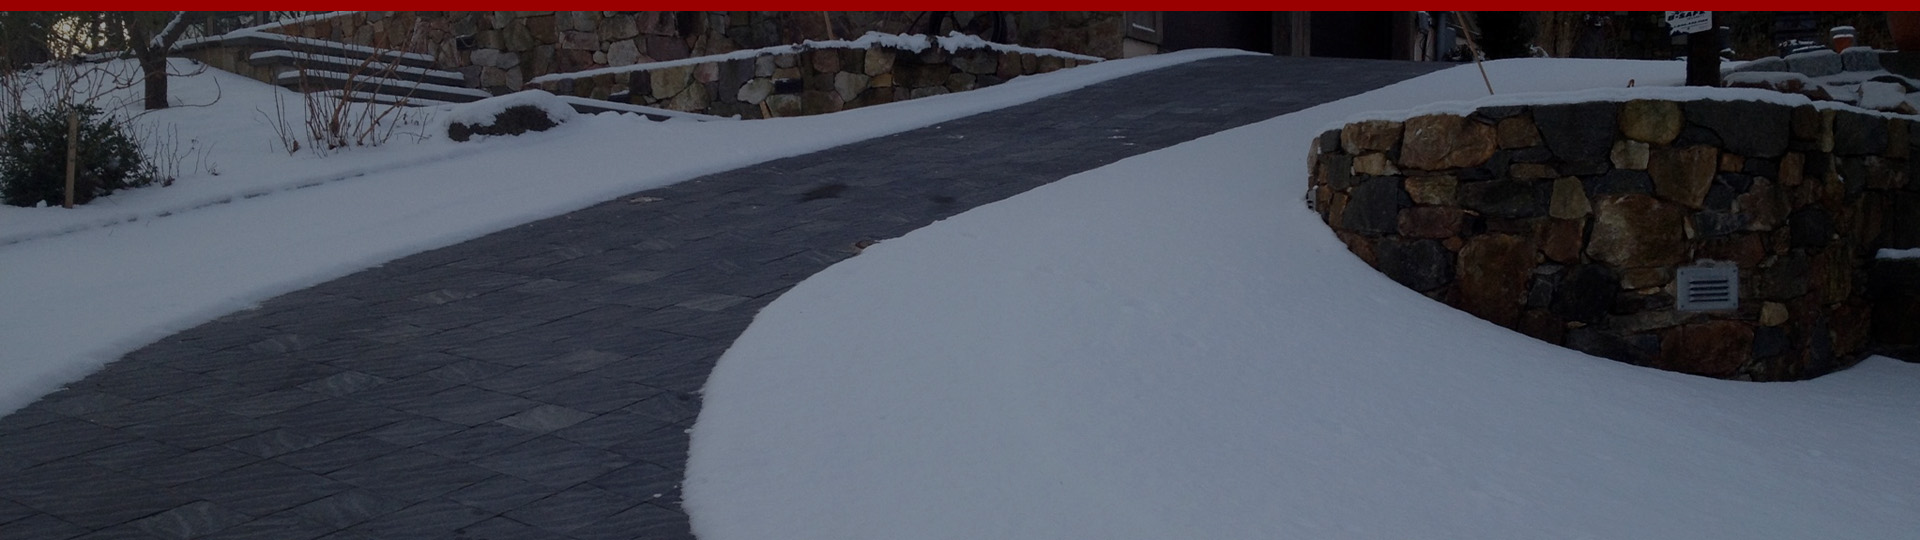 Radiant heated driveway systems